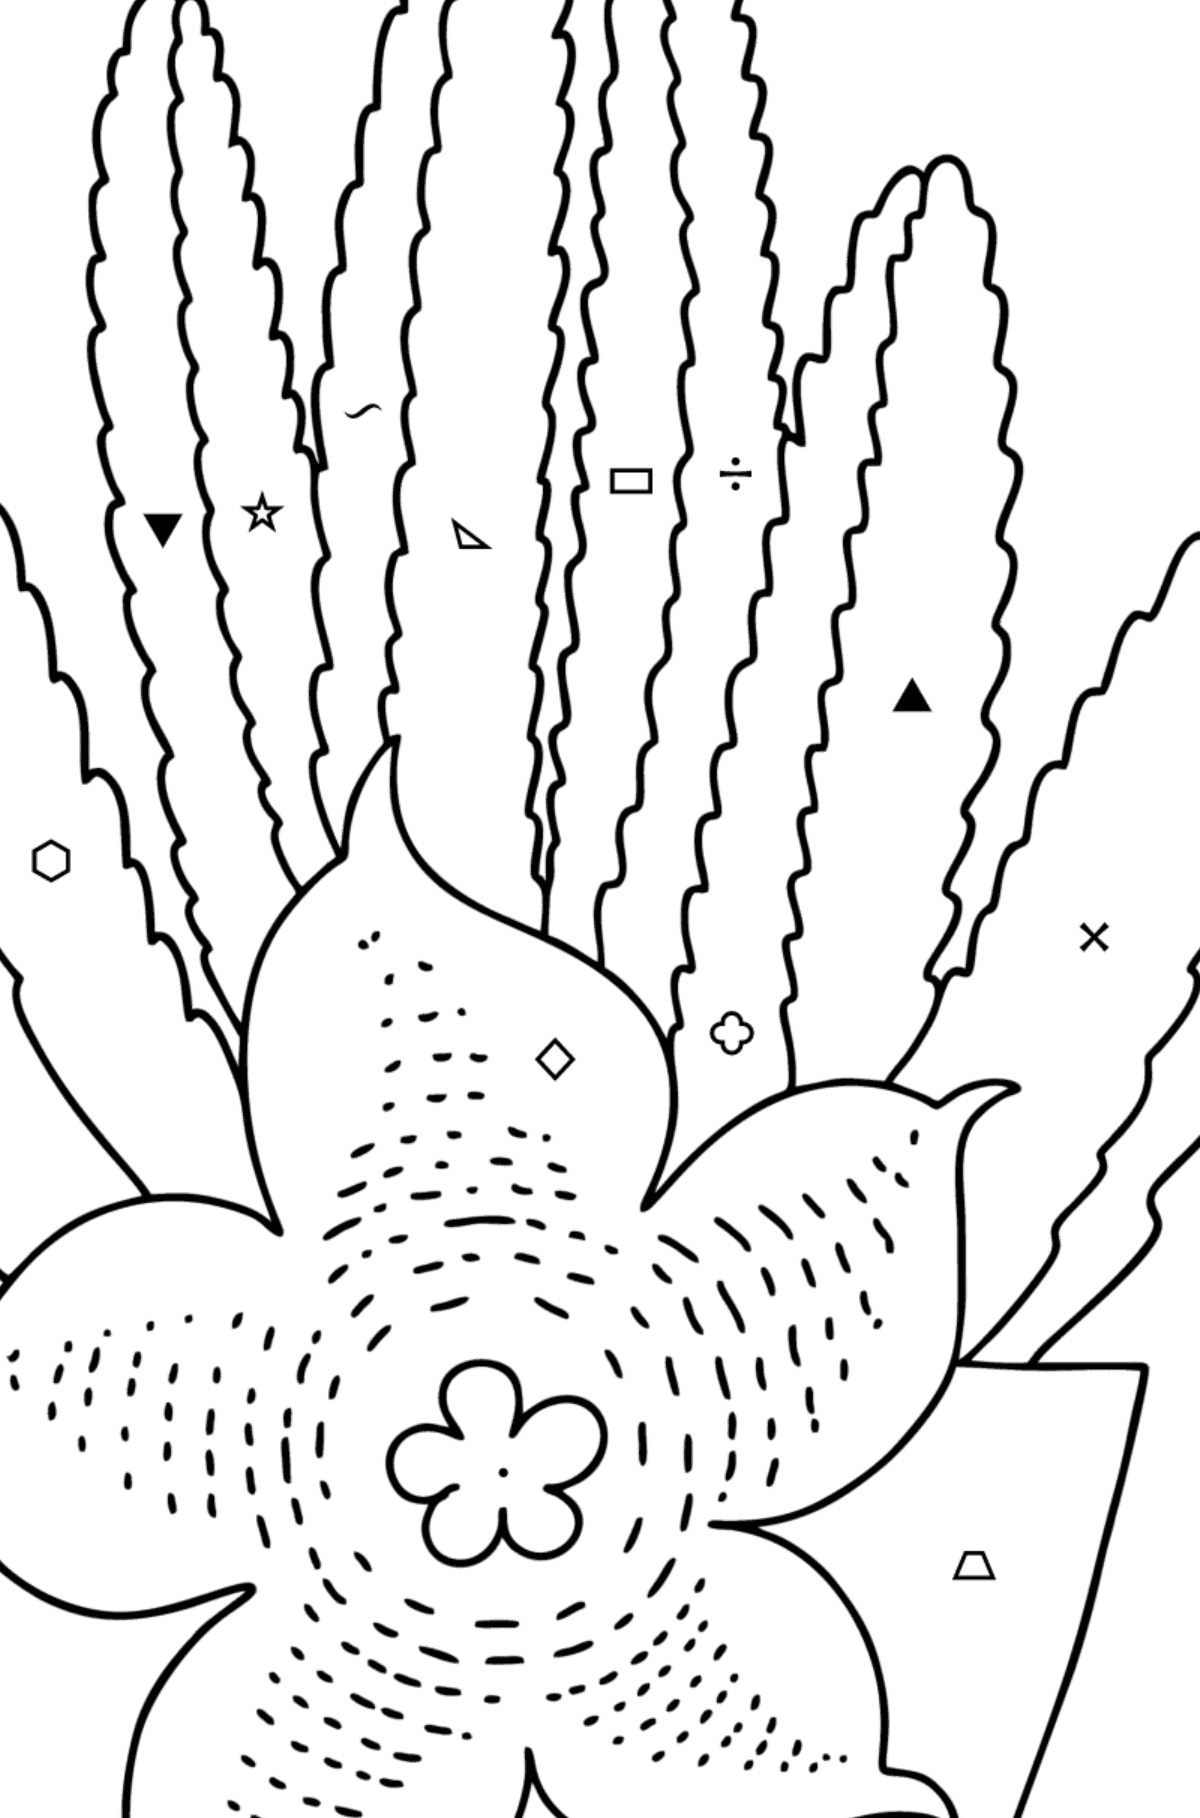 Stapelia Cactus coloring page - Coloring by Symbols and Geometric Shapes for Kids